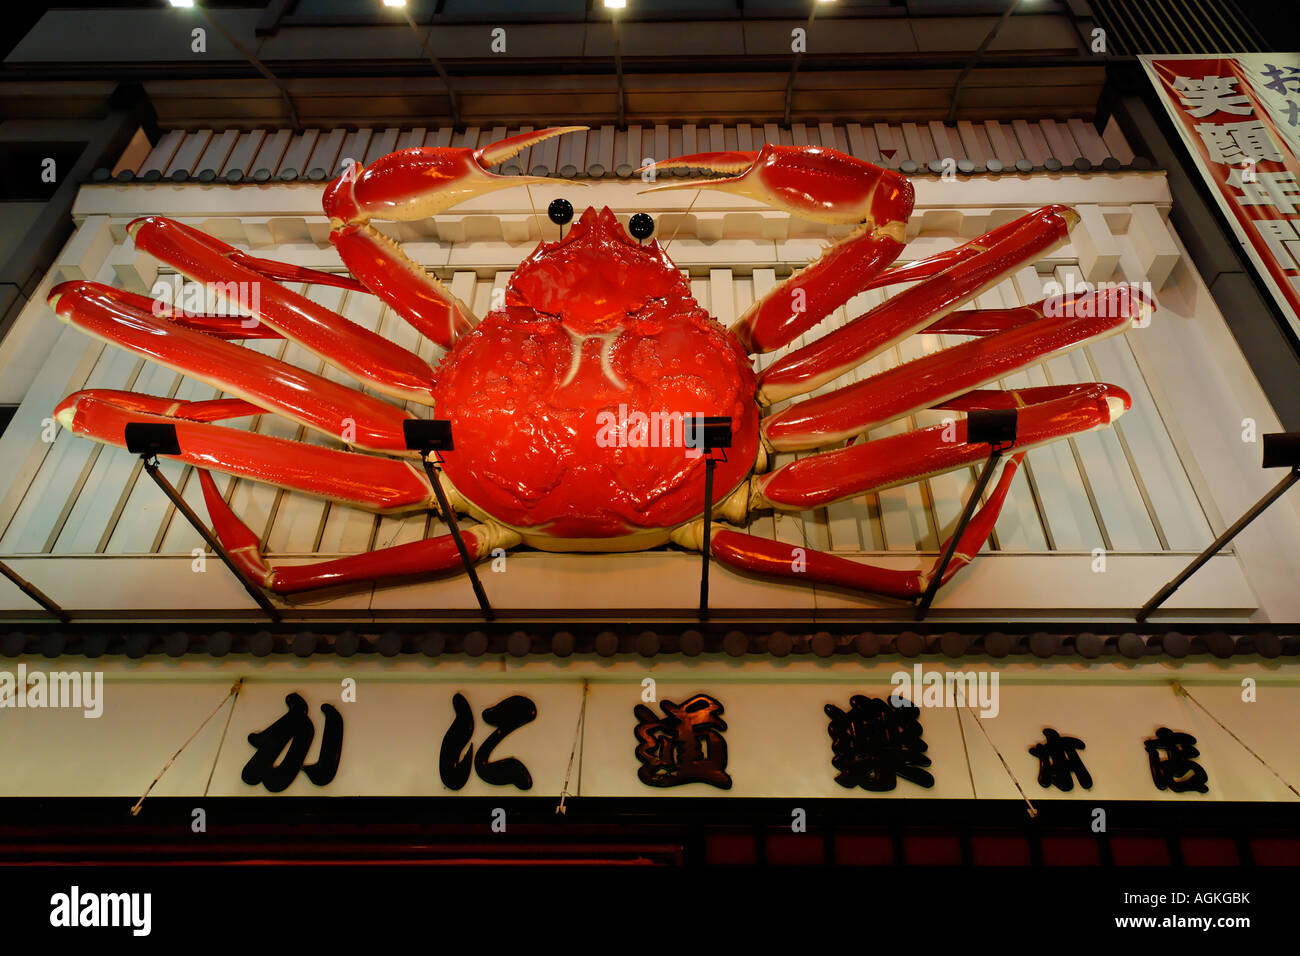 Kani Doraku: A crab restaurant, easily identified by its giant moving crab billboard. One of the most famous landmarks of Osaka. Stock Photo